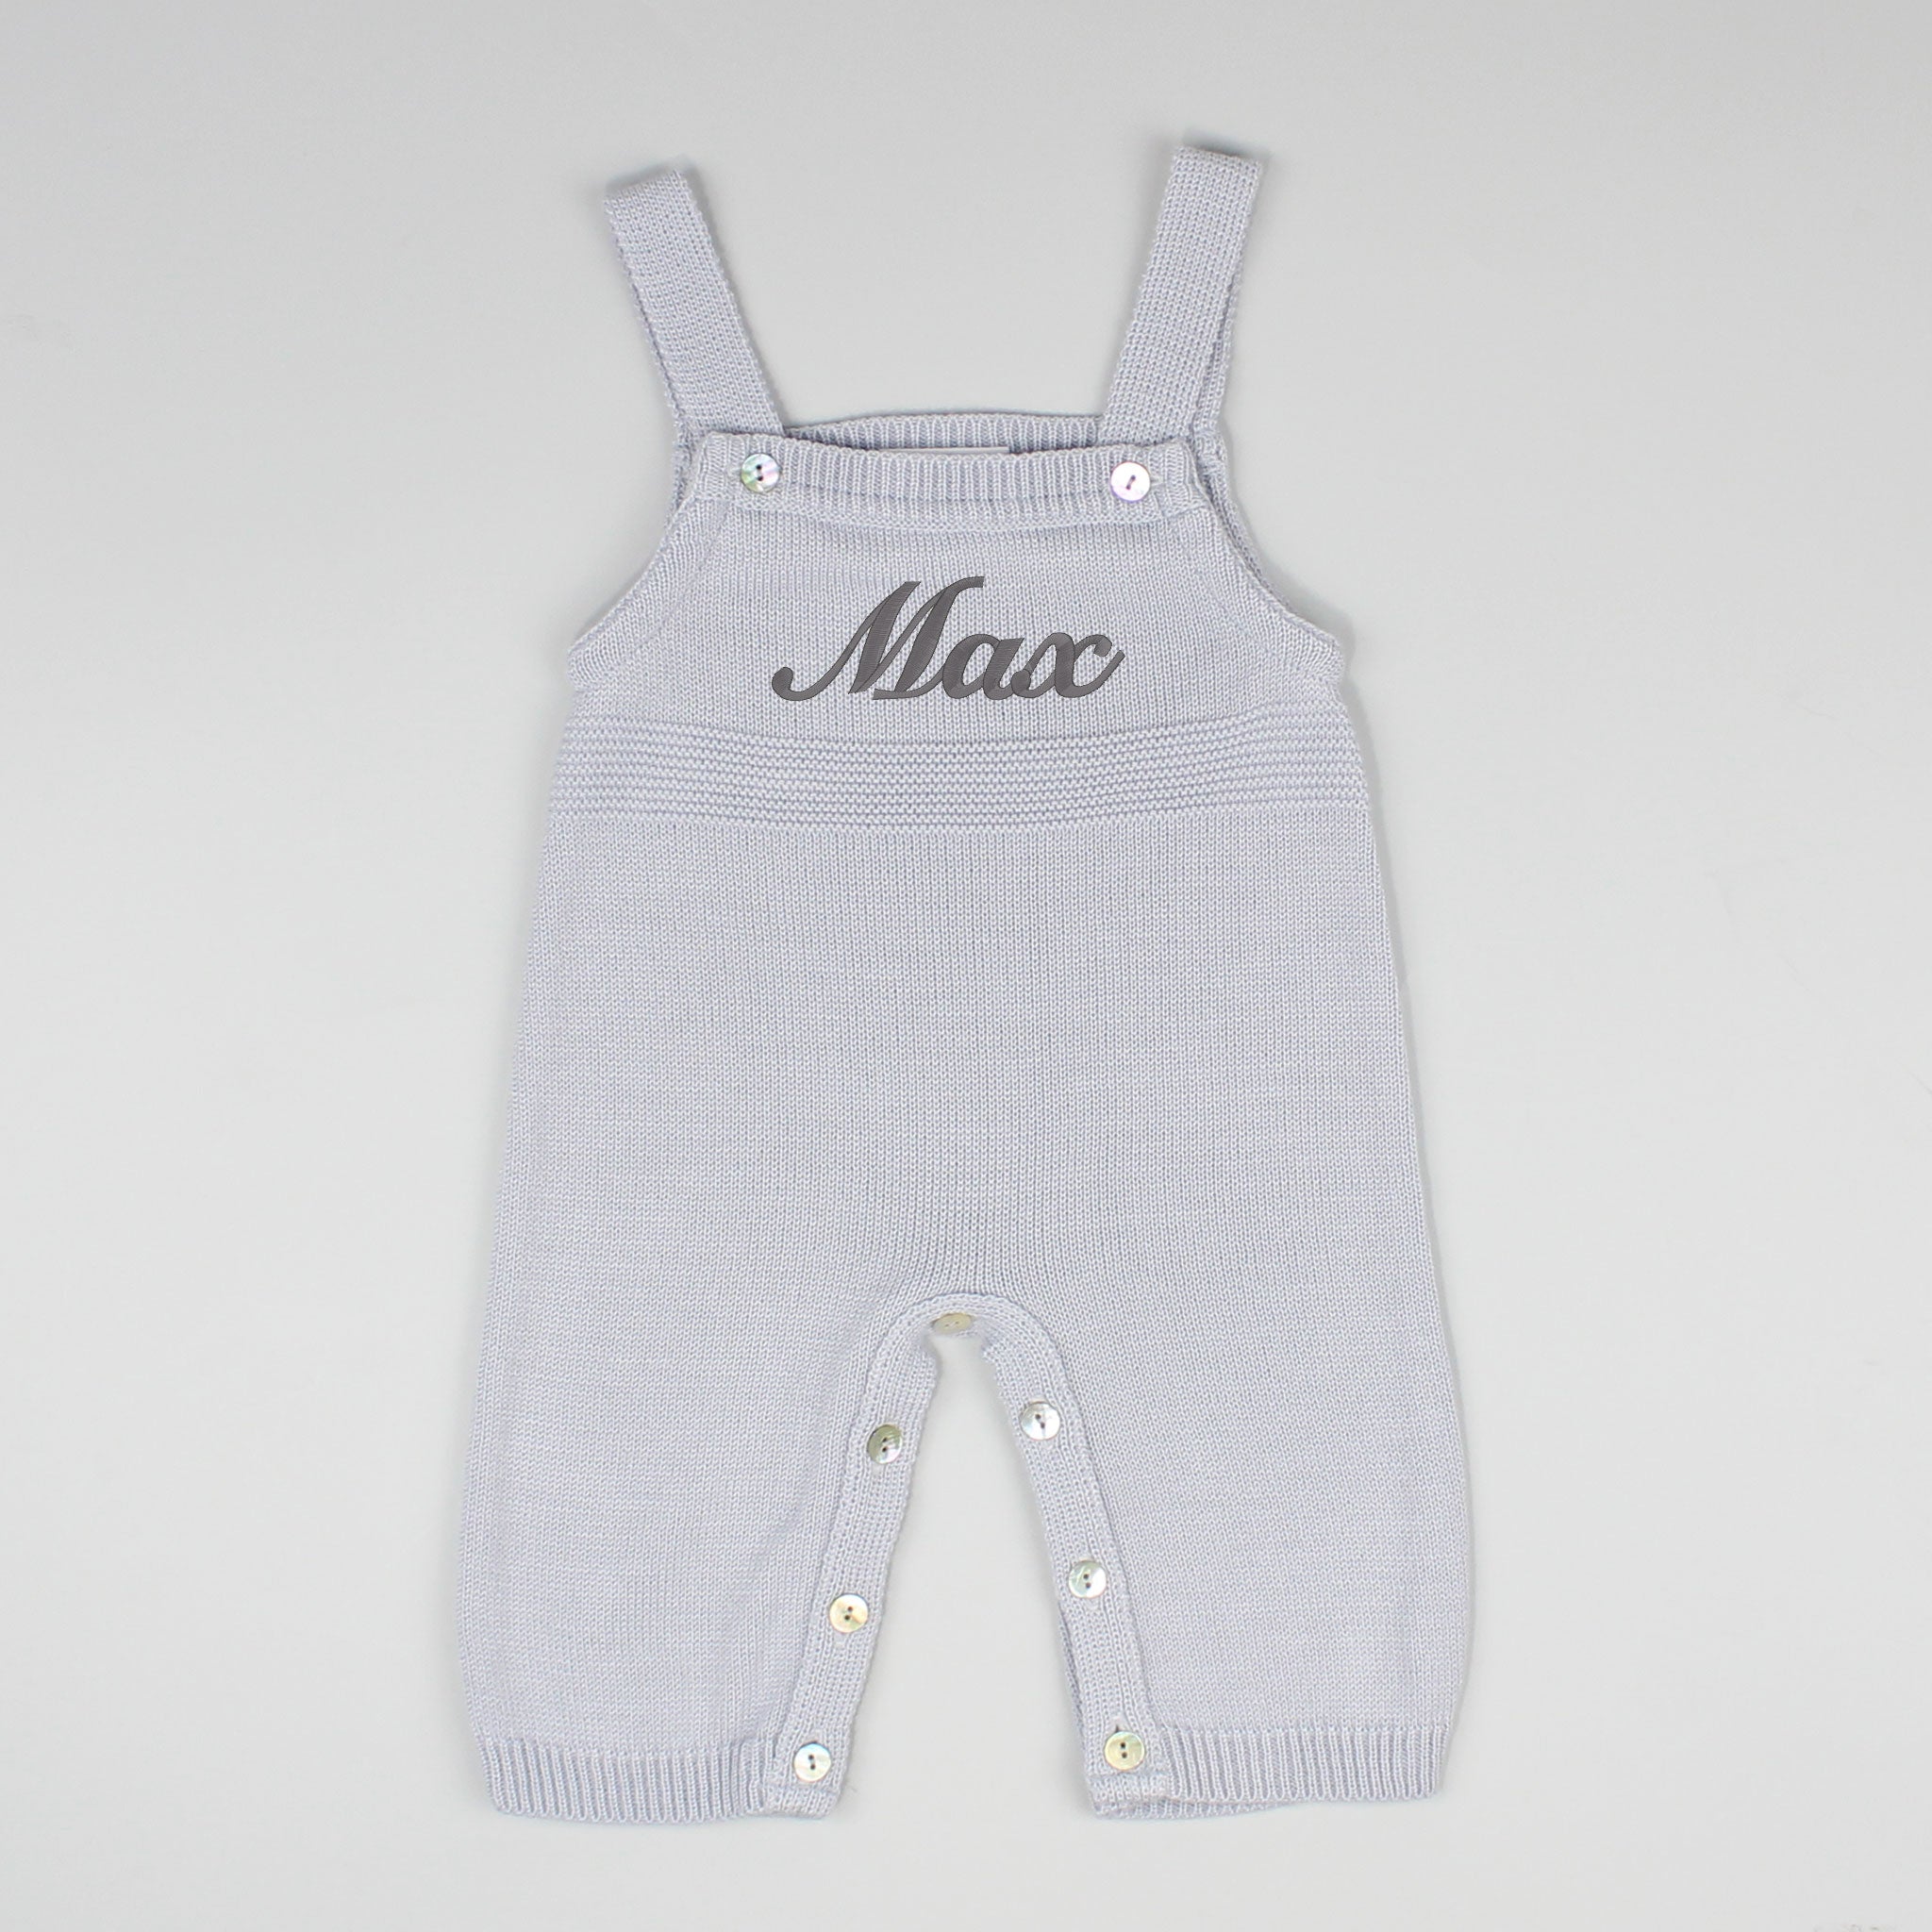 personalised baby dungarees 